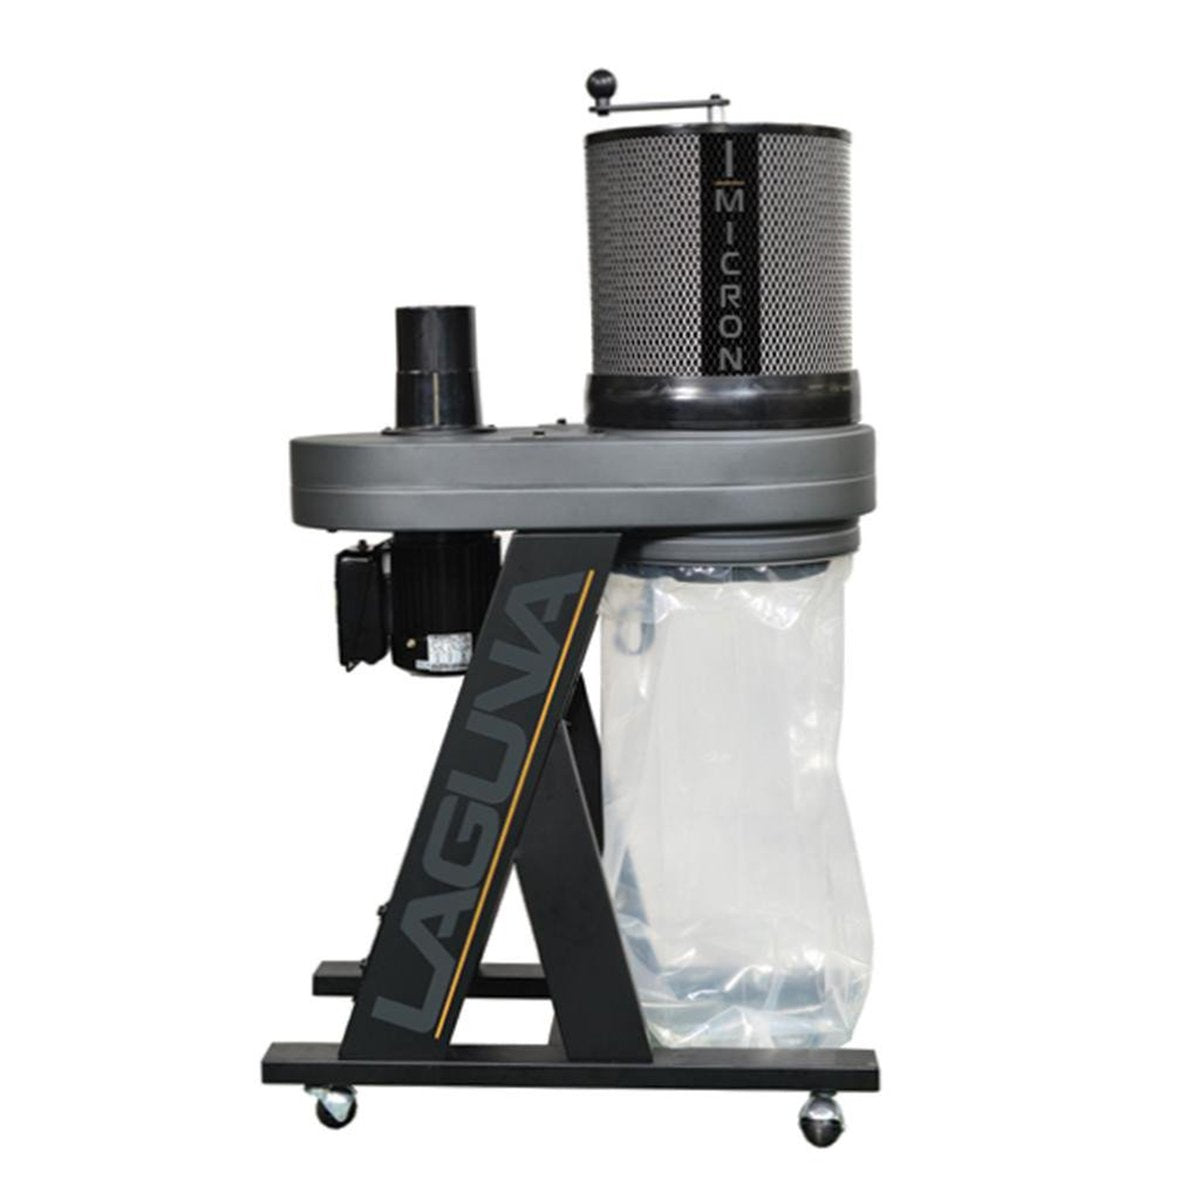 Laguna b Flux 1HP Dust Collector with 1 Micron Filter (FOB Ultimate Tools)